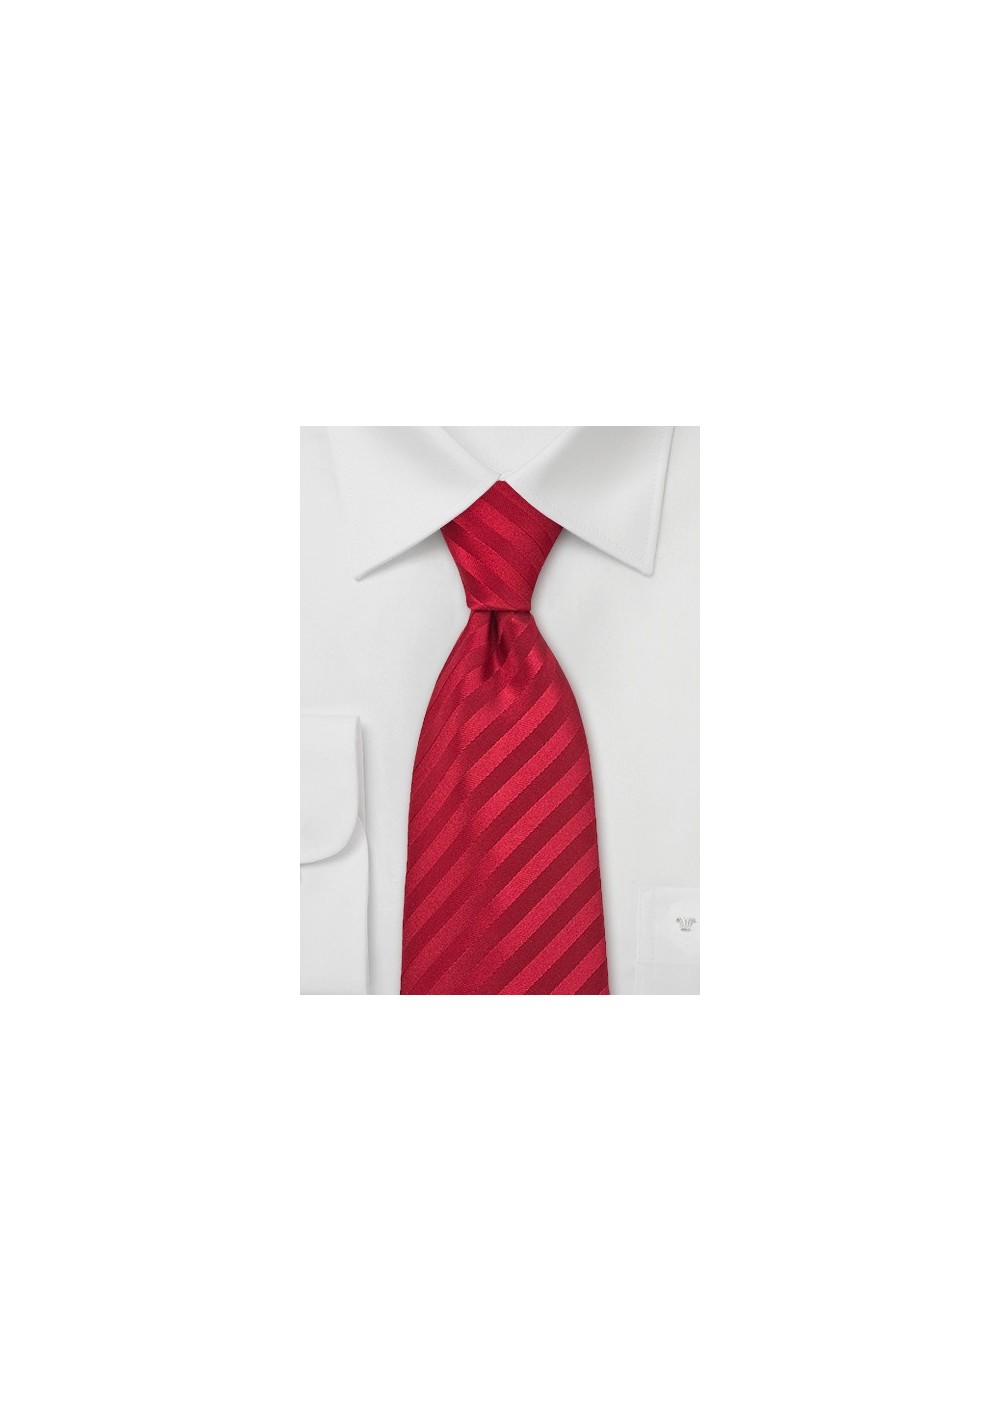 Bright Ruby Red Necktie in Extra Long Size